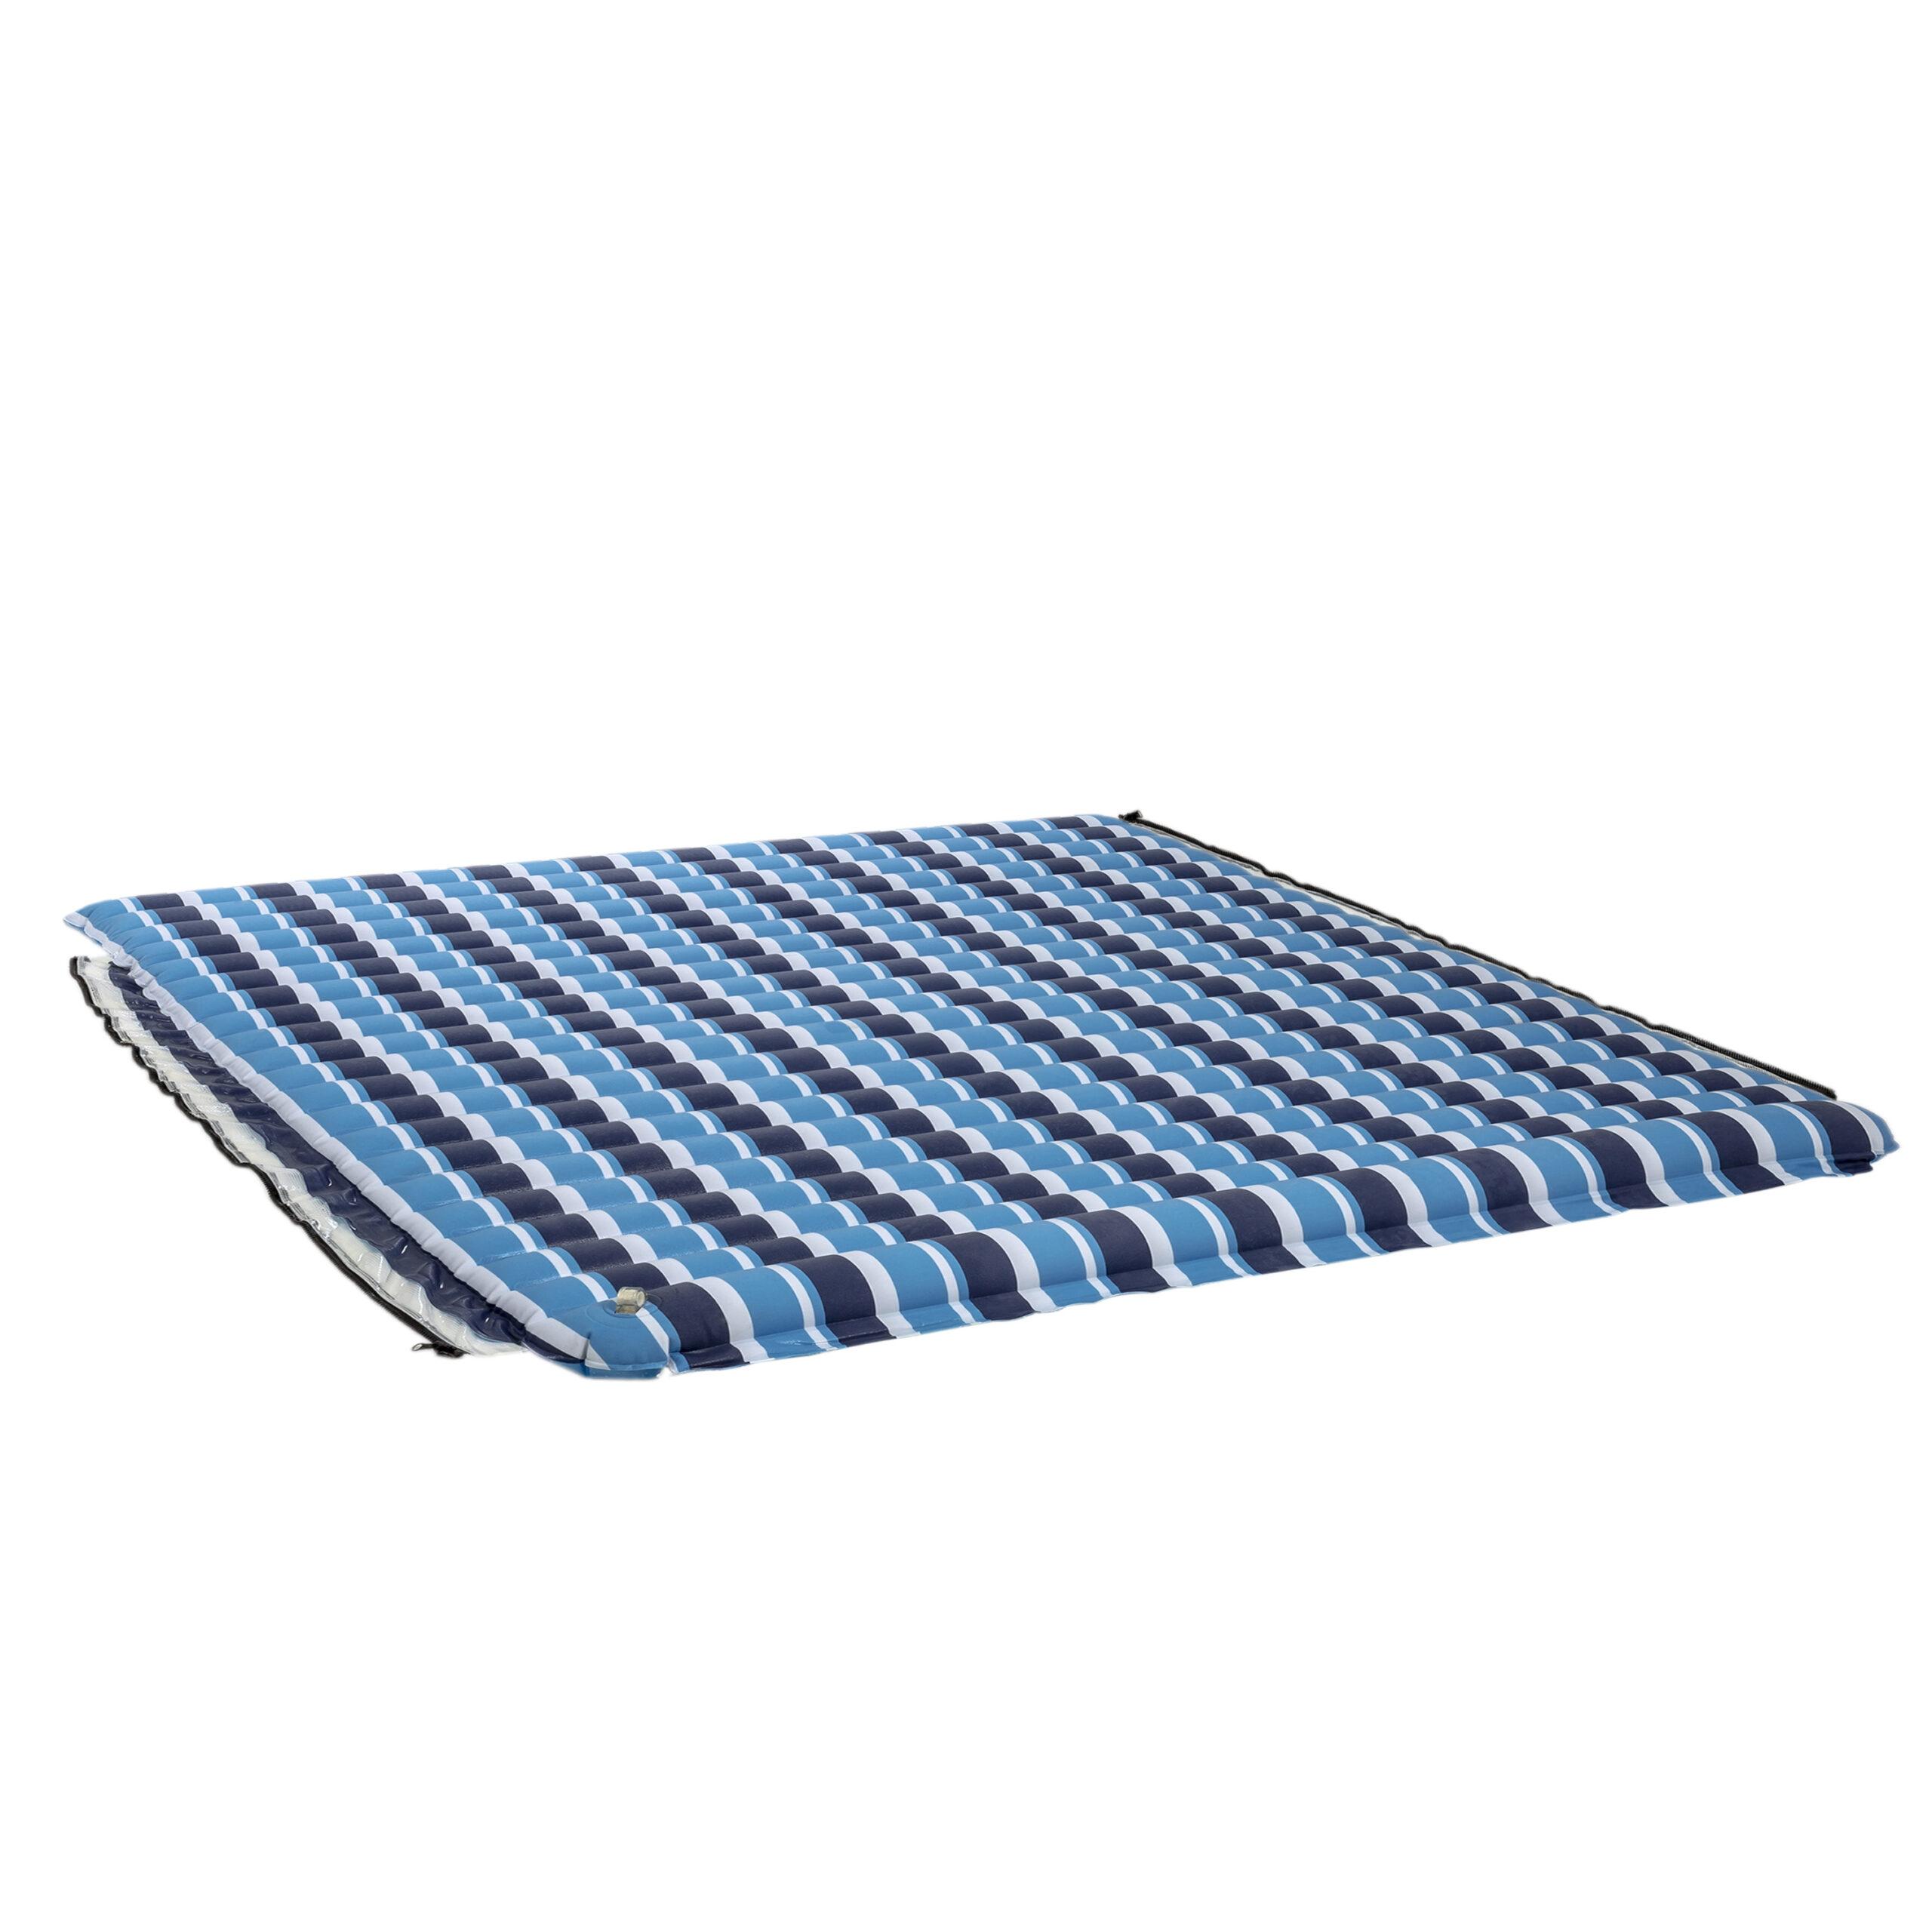 Product 6 x 6 Party Platform | Ultimate Floating Water Mat - Aqua-Leisure image